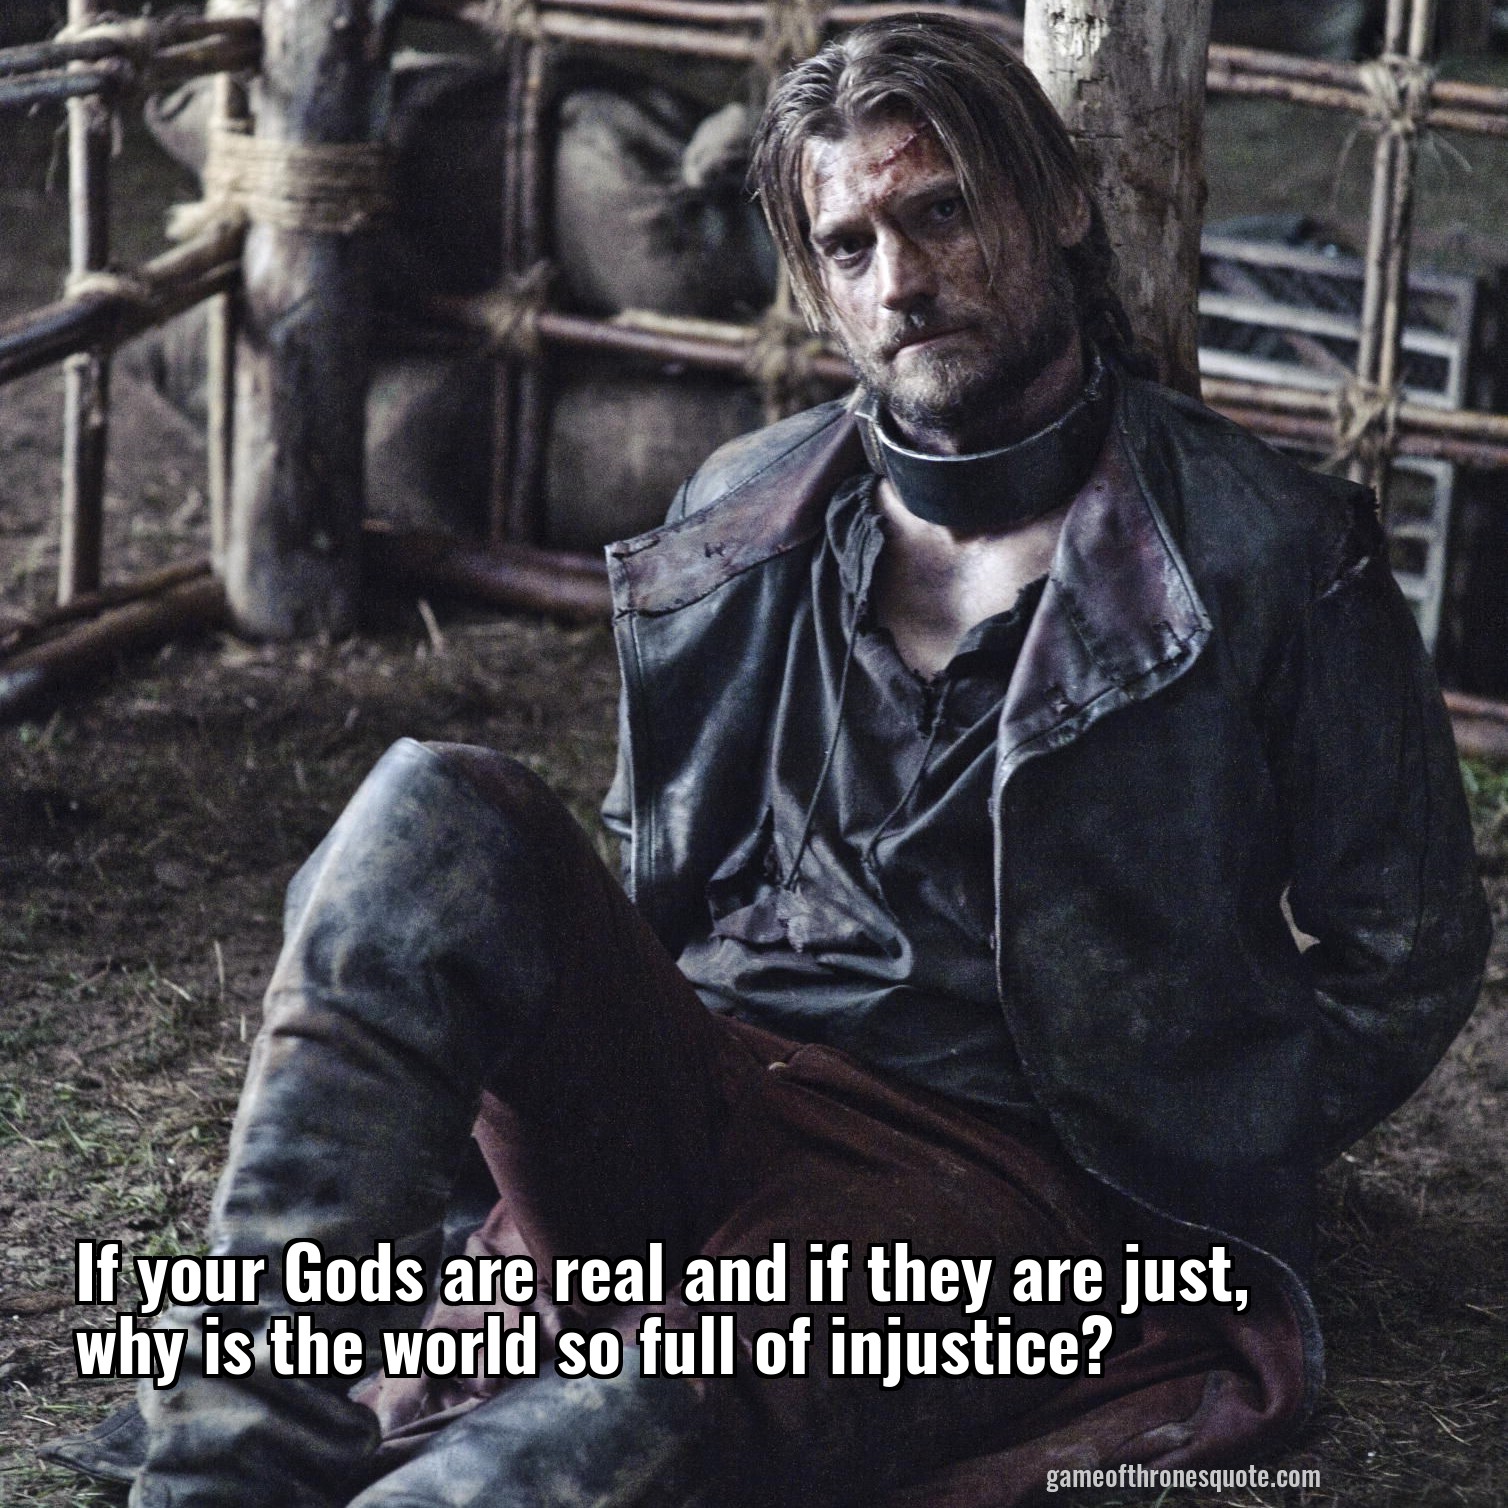 If your Gods are real and if they are just, why is the world so full of injustice?